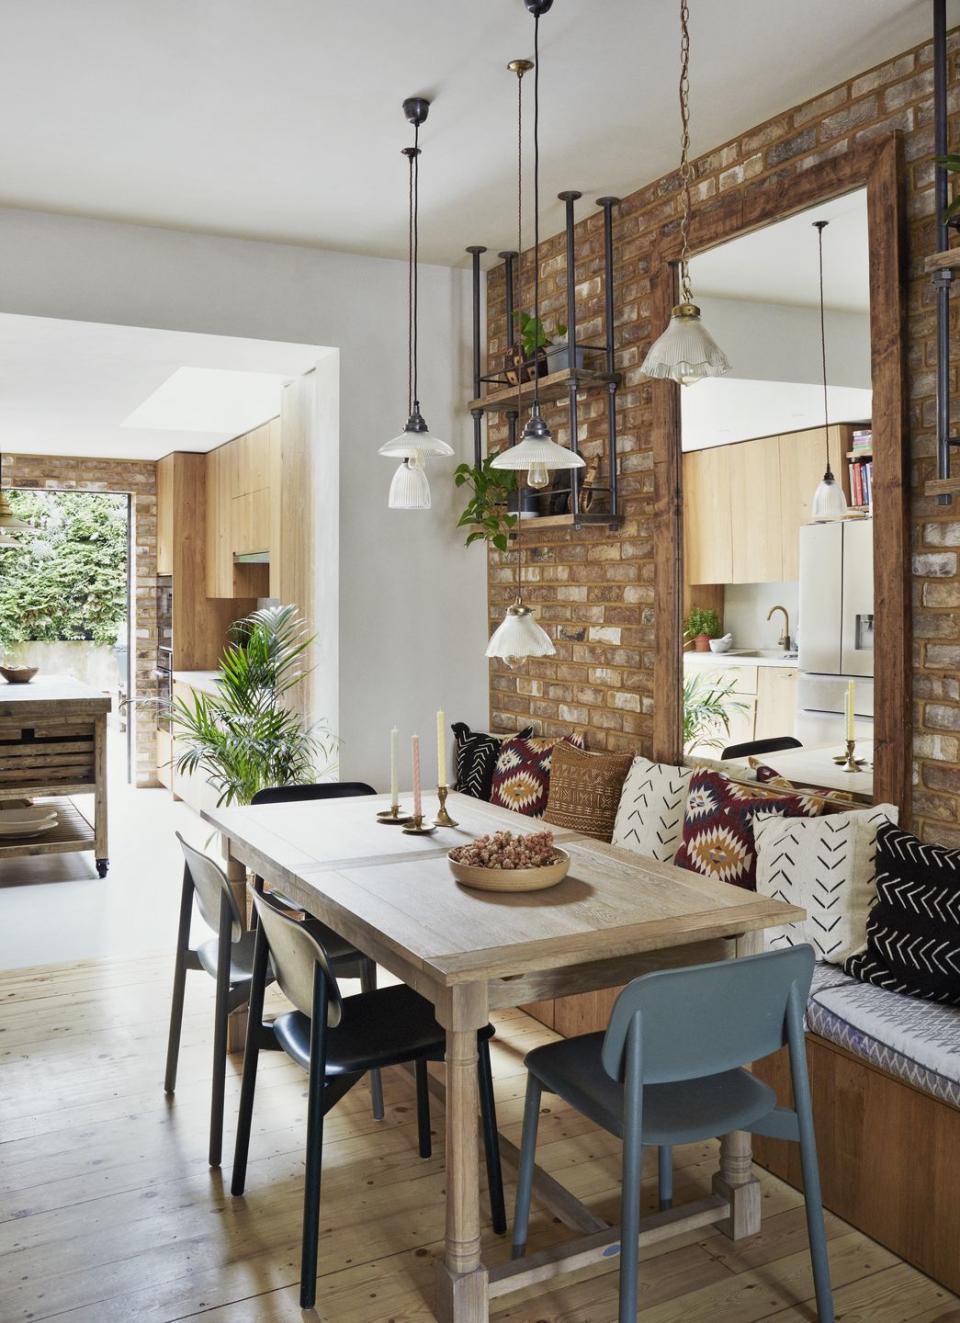 modern kitchen dining area with exposed brick walls and built in banquette seating